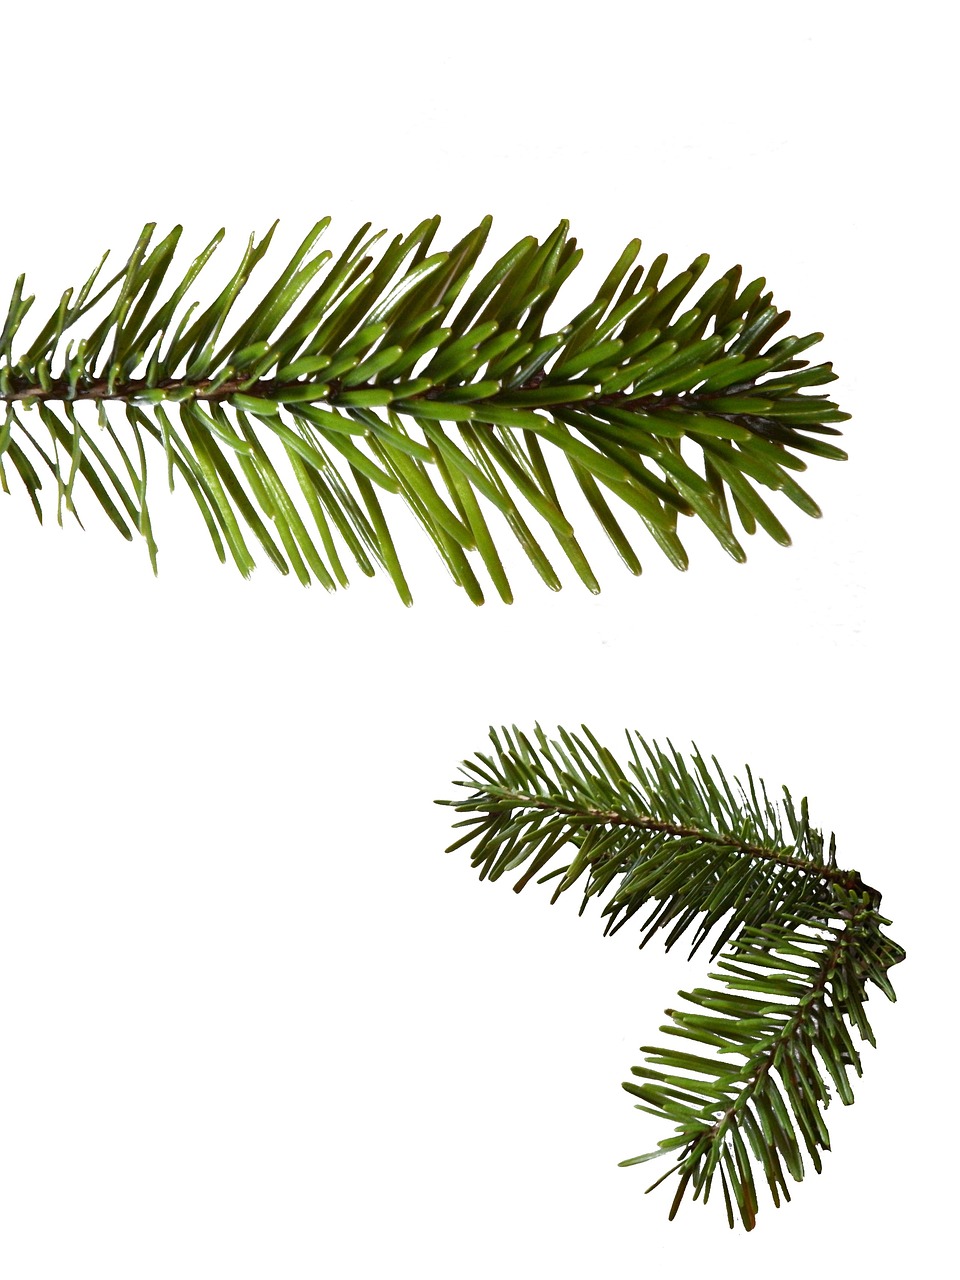 a close up of a pine tree branch, an illustration of, shutterstock, top and side view, festive, symmetric, - h 1 0 2 4